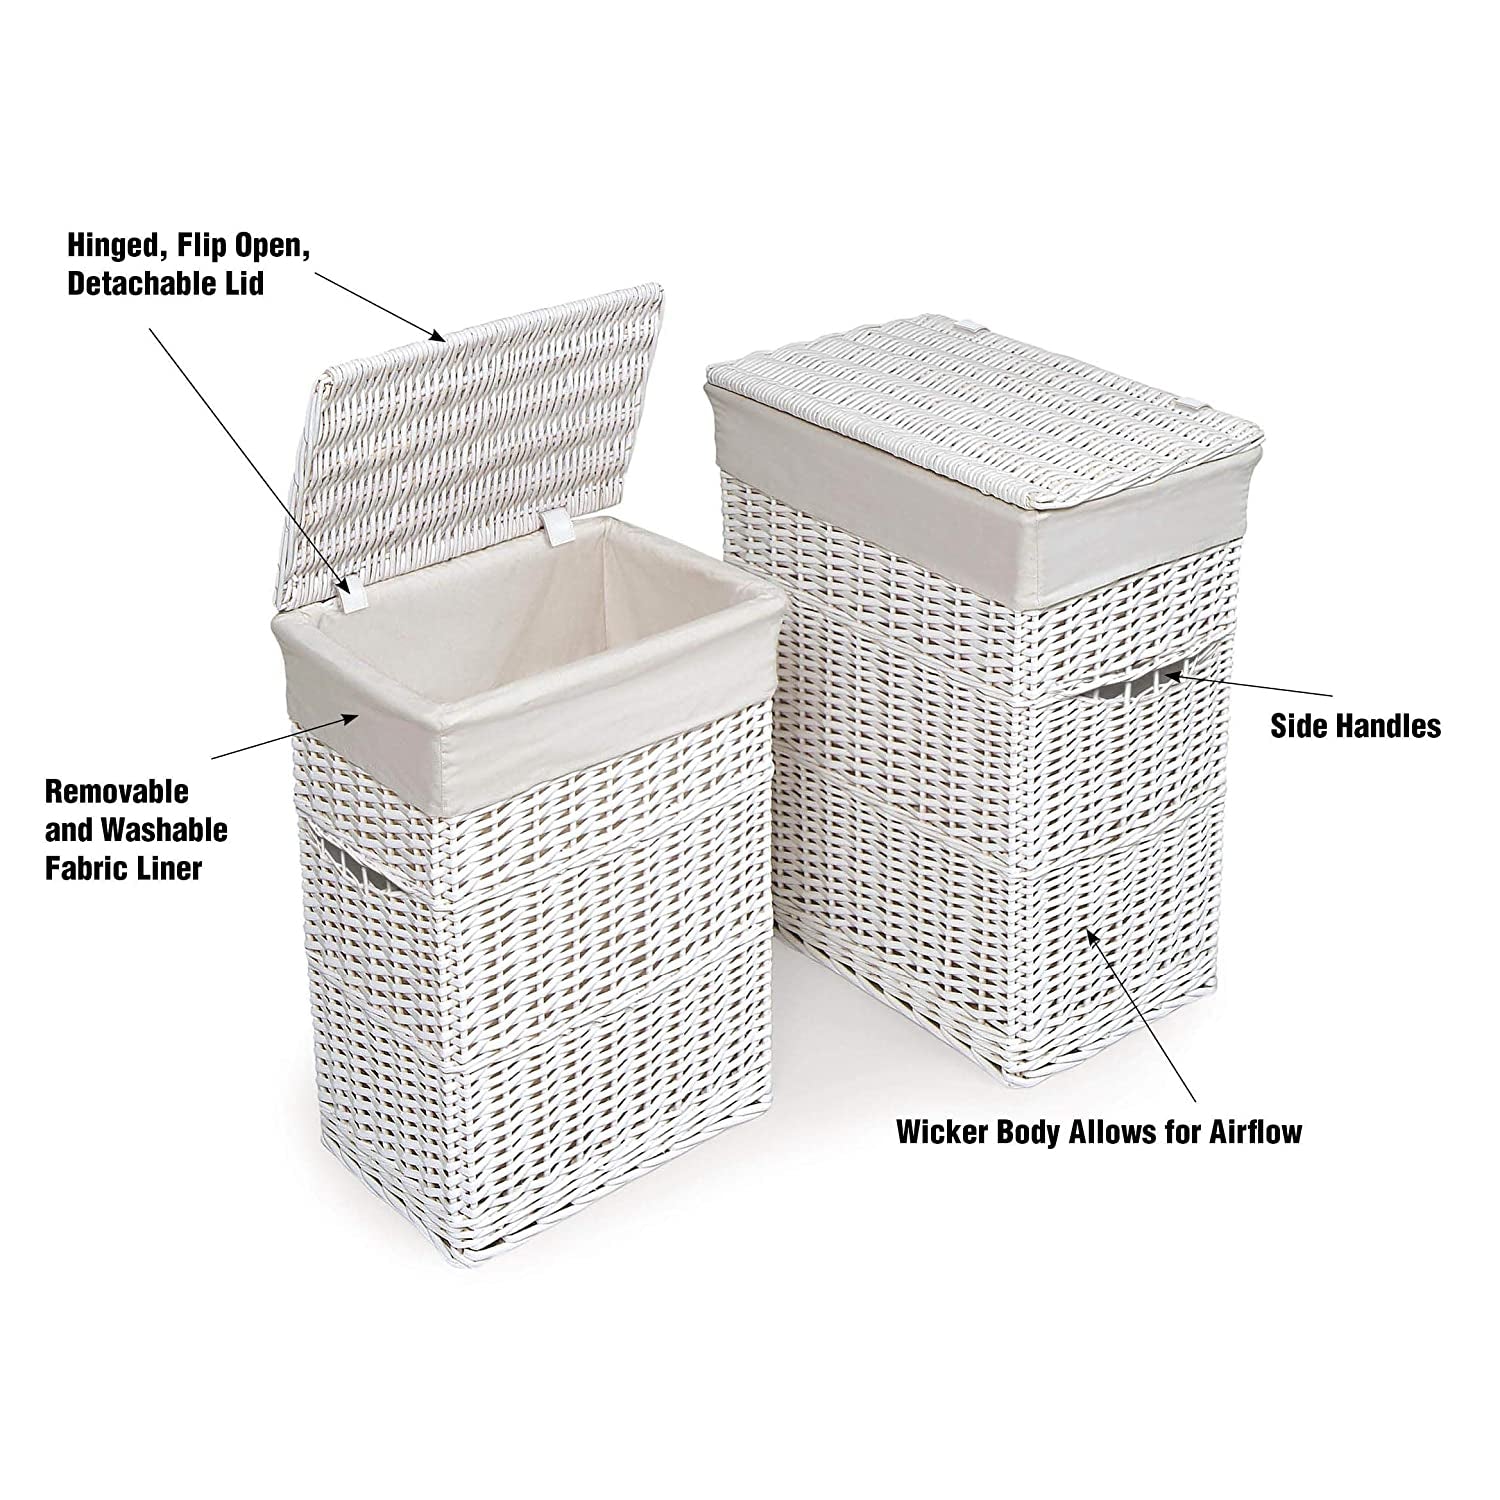 Badger Basket Wicker Two Hamper Set with Liners – White